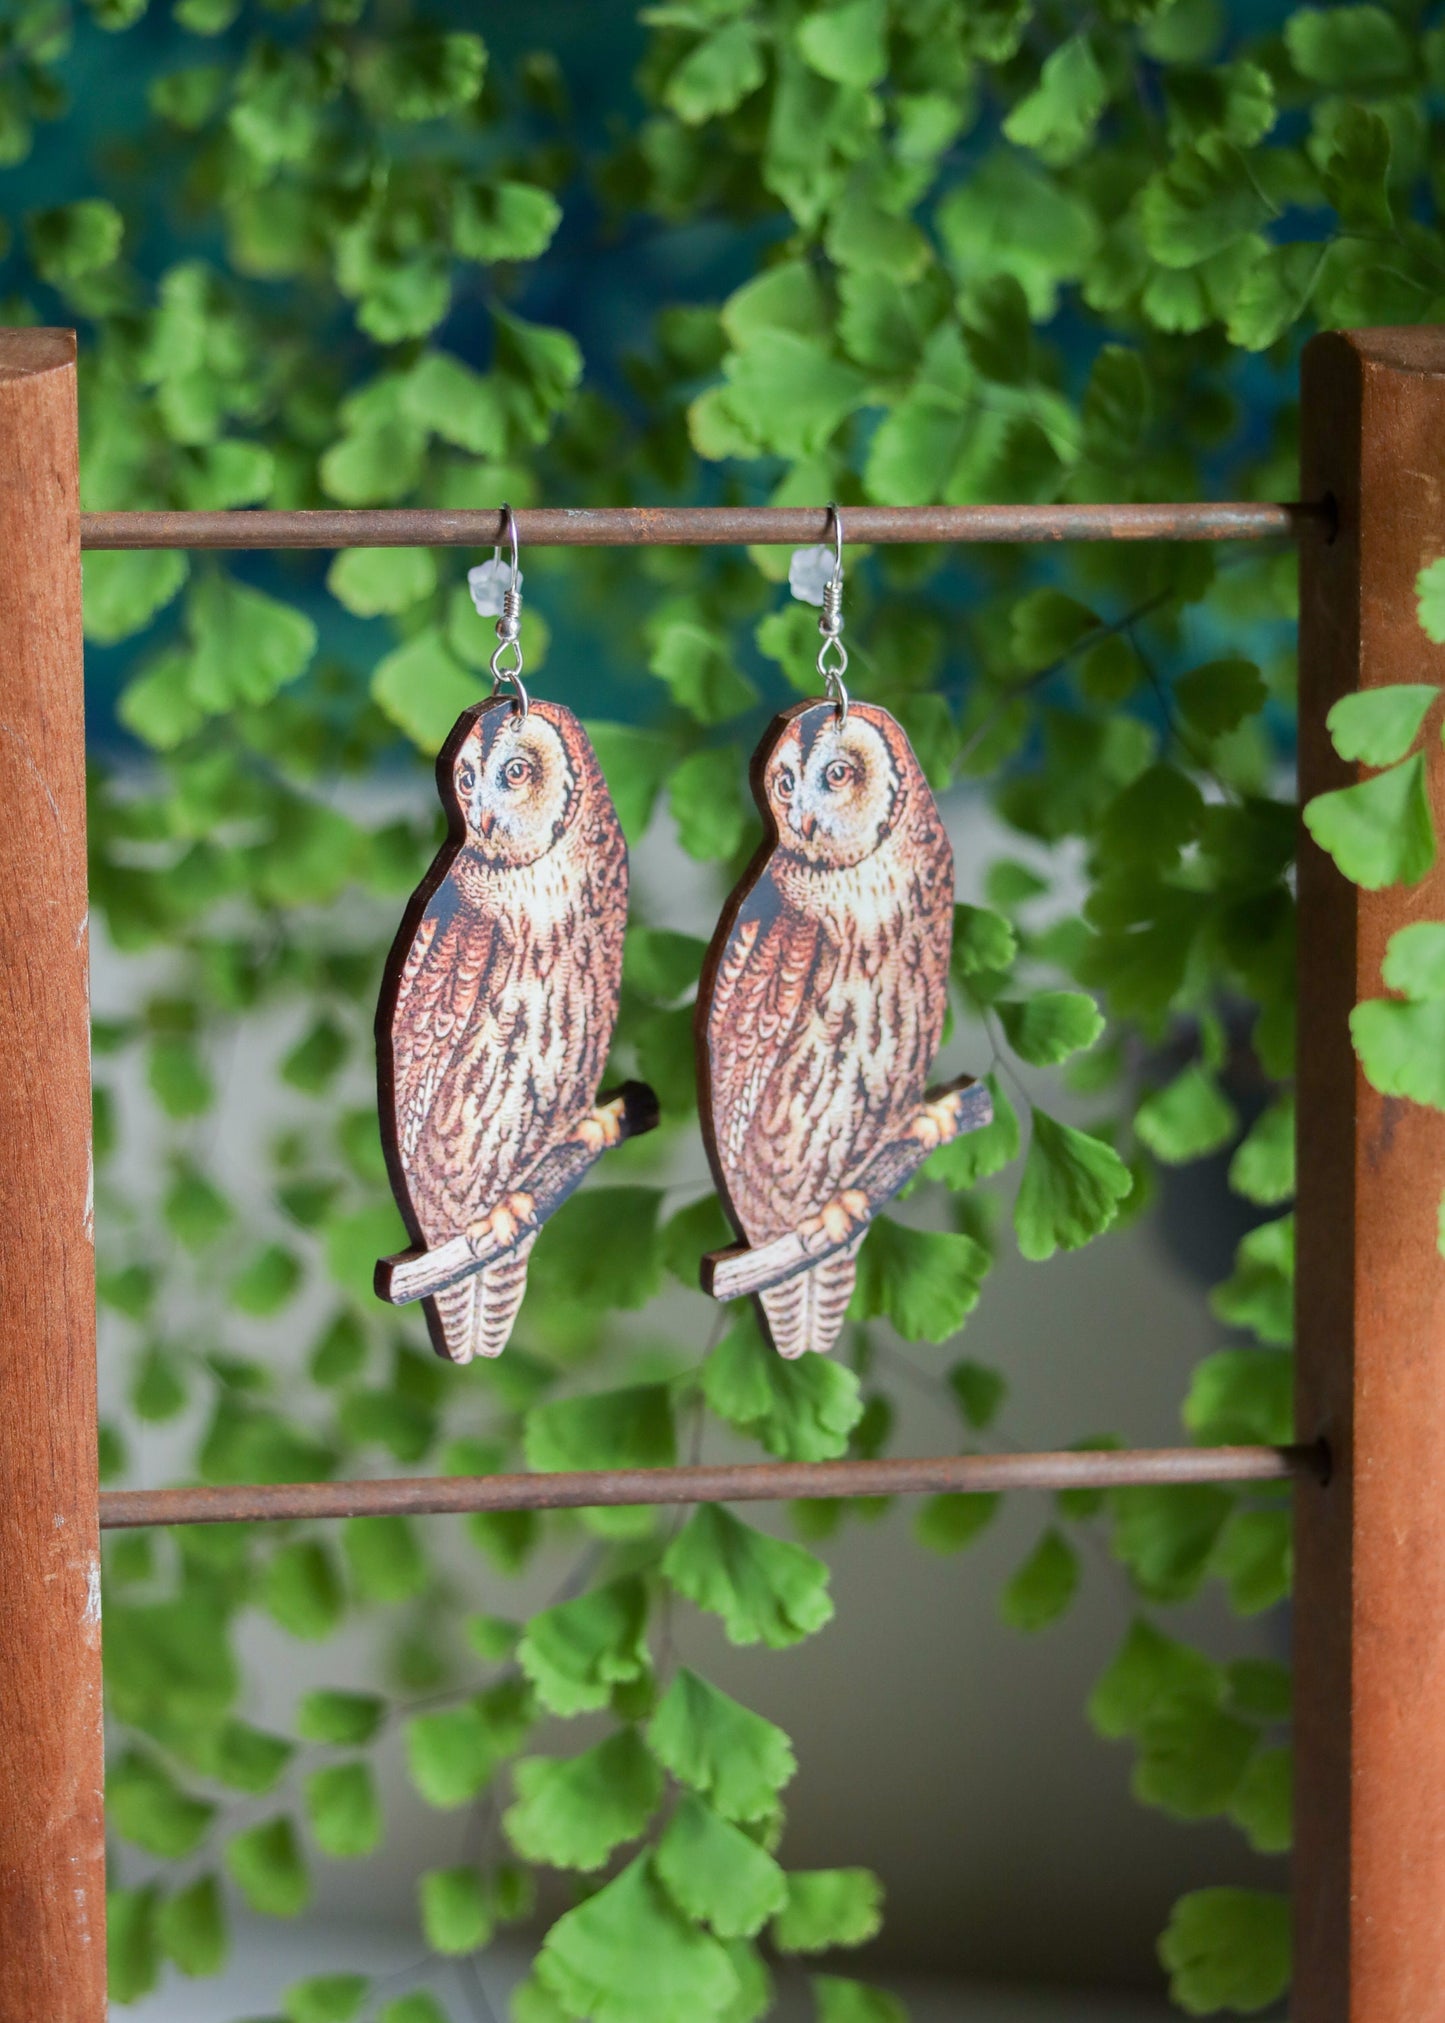 Owl Earrings | Whimsical Woodland Creature Dangles | Laser Cut Wooden Jewelry | Goblincore Fairycore Witchy Fantasy Spirit Animal